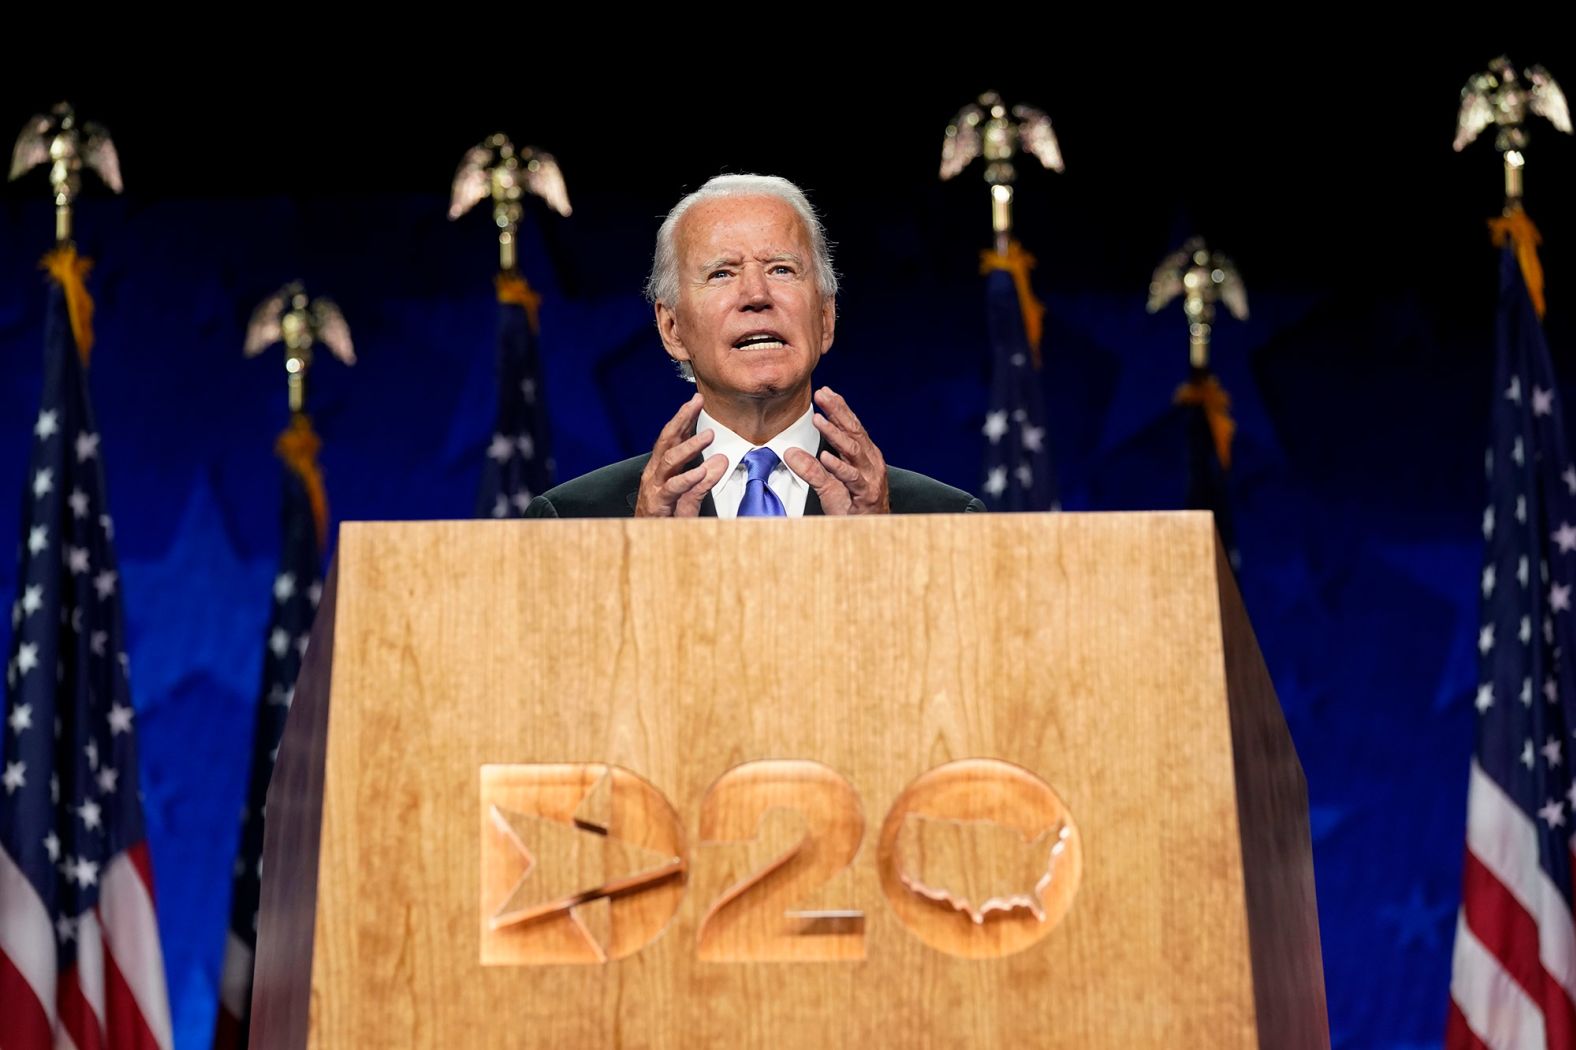 Biden <a href="index.php?page=&url=https%3A%2F%2Fwww.cnn.com%2F2020%2F08%2F20%2Fpolitics%2Fdemocratic-convention-joe-biden-speech%2Findex.html" target="_blank">accepts the Democratic Party's presidential nomination</a> during a speech at the Democratic National Convention. "This campaign isn't just about winning votes," Biden said. "It is about winning the heart and, yes, the soul of America."